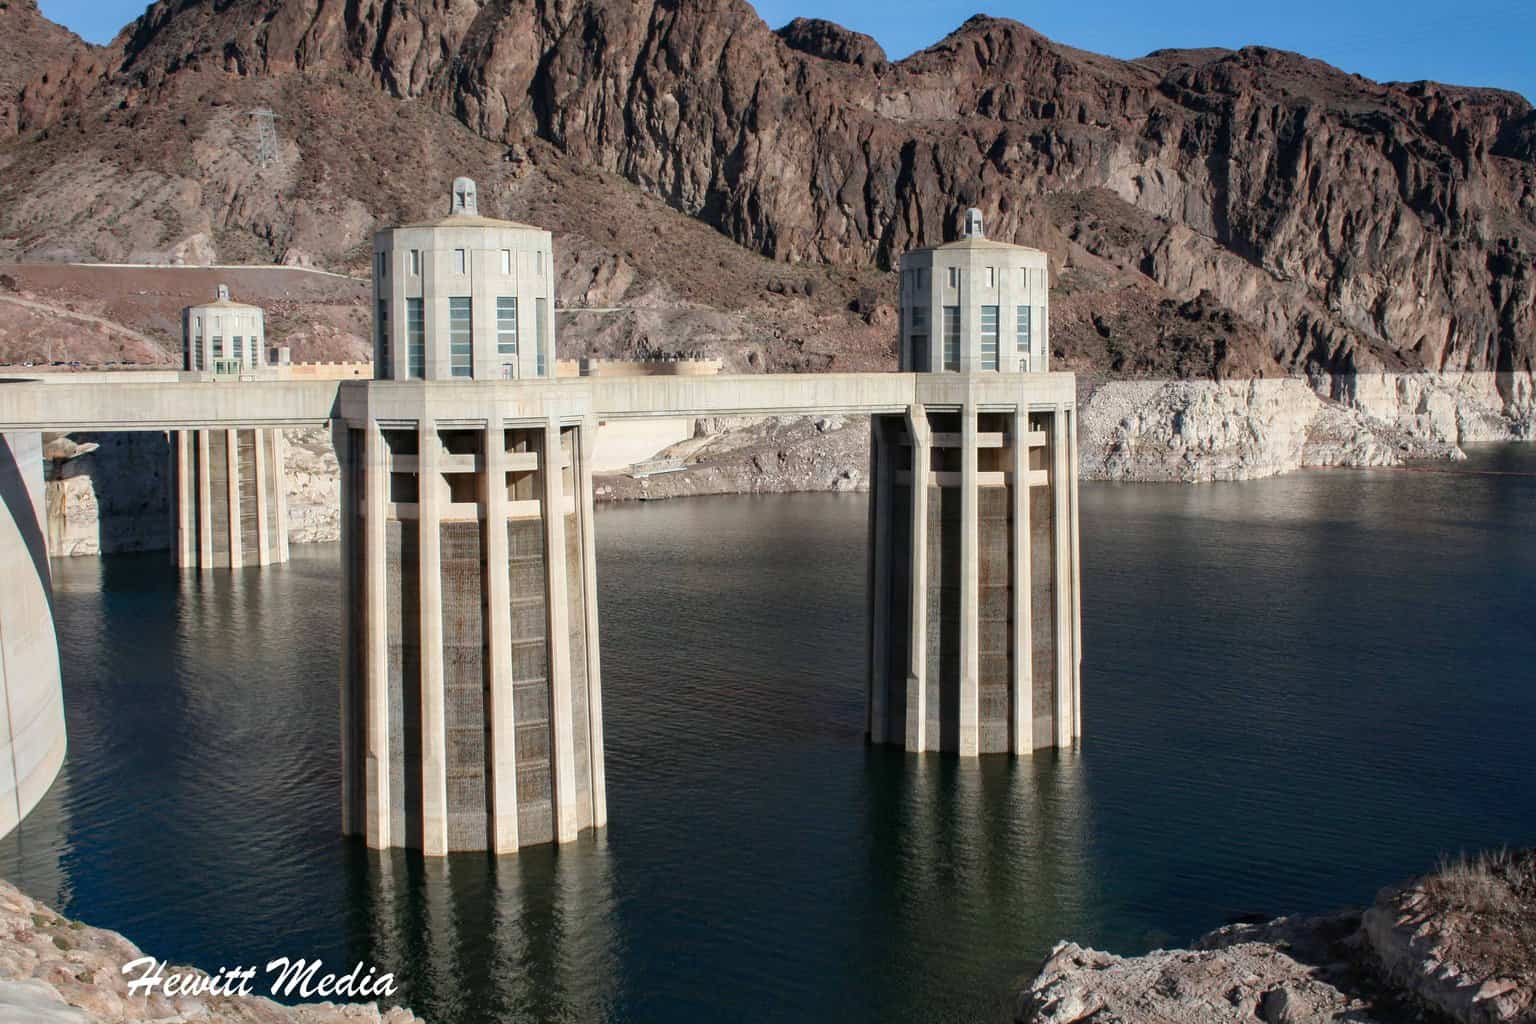 Hoover Dam Visitor's Guide